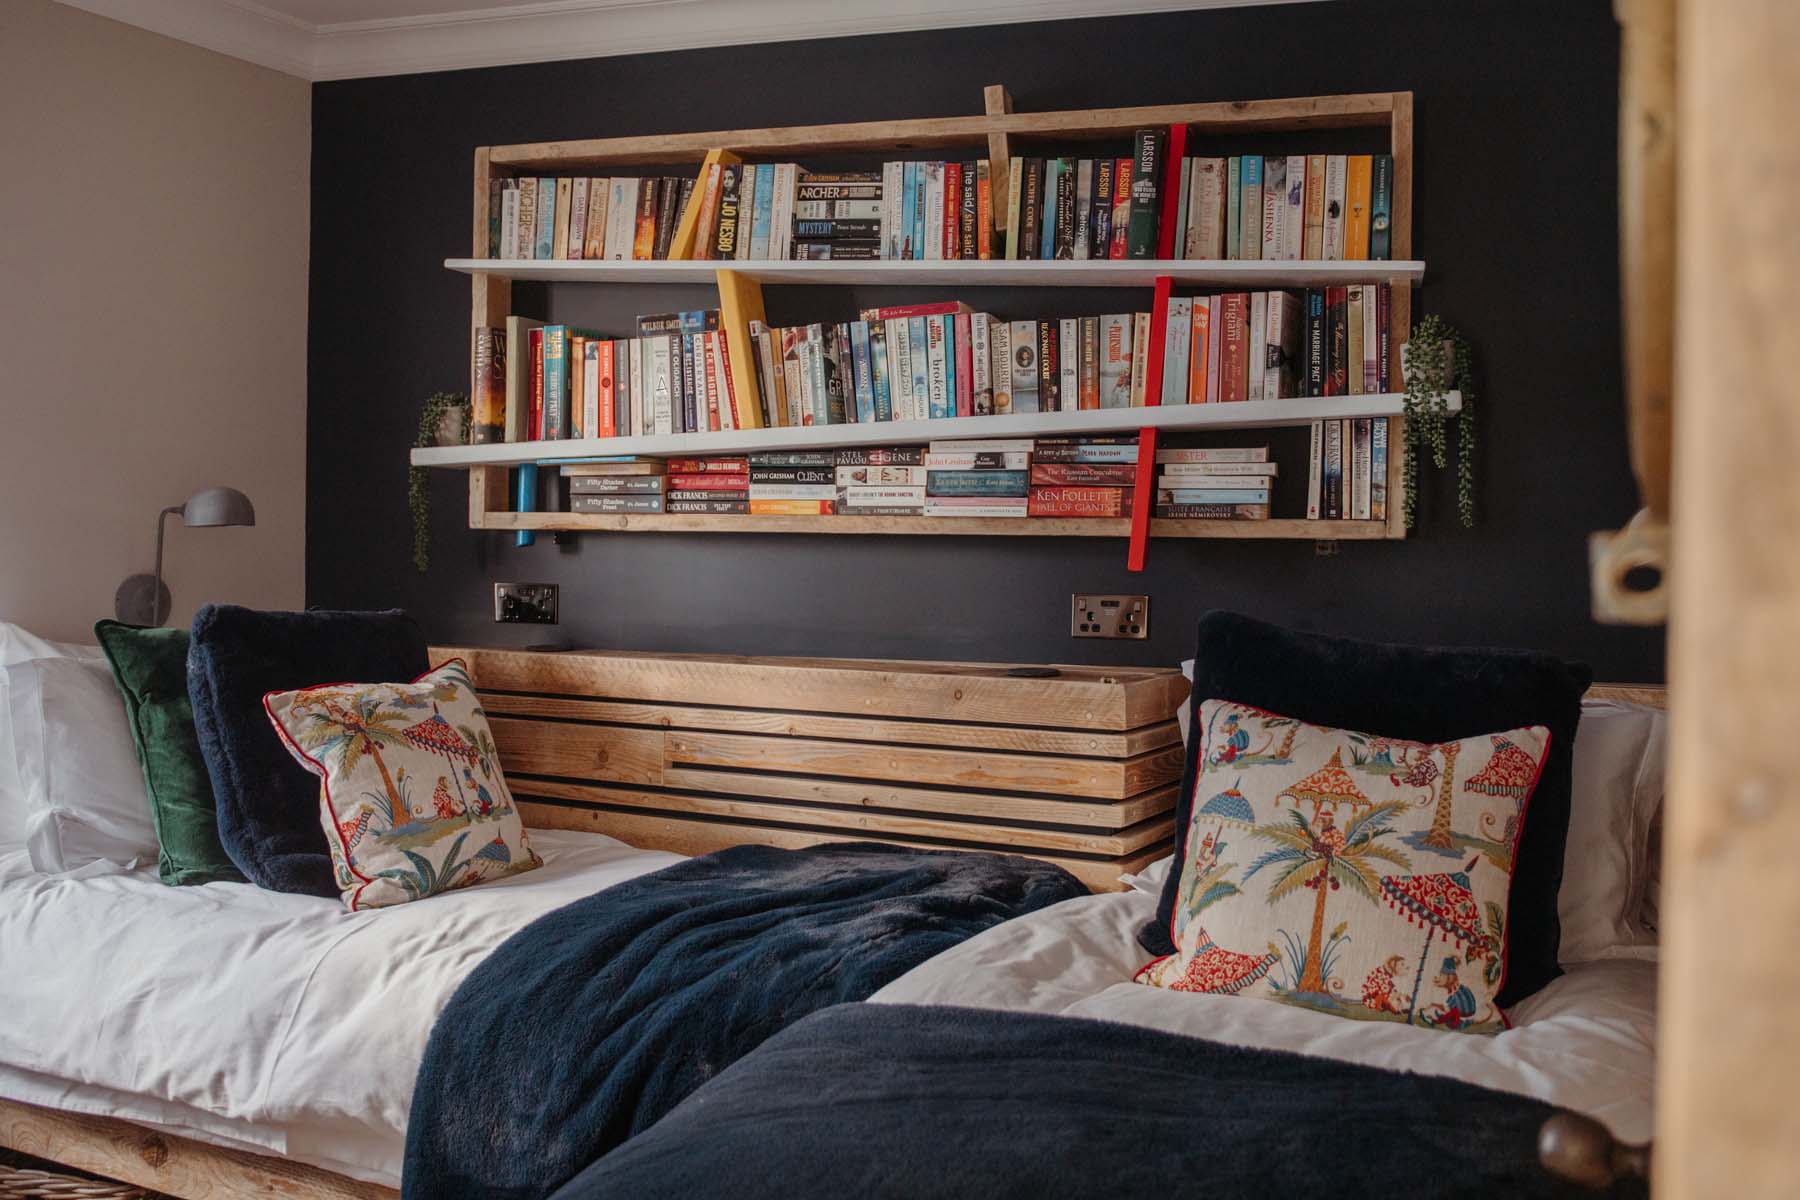 Kids bedroom with bookshelves on the wall